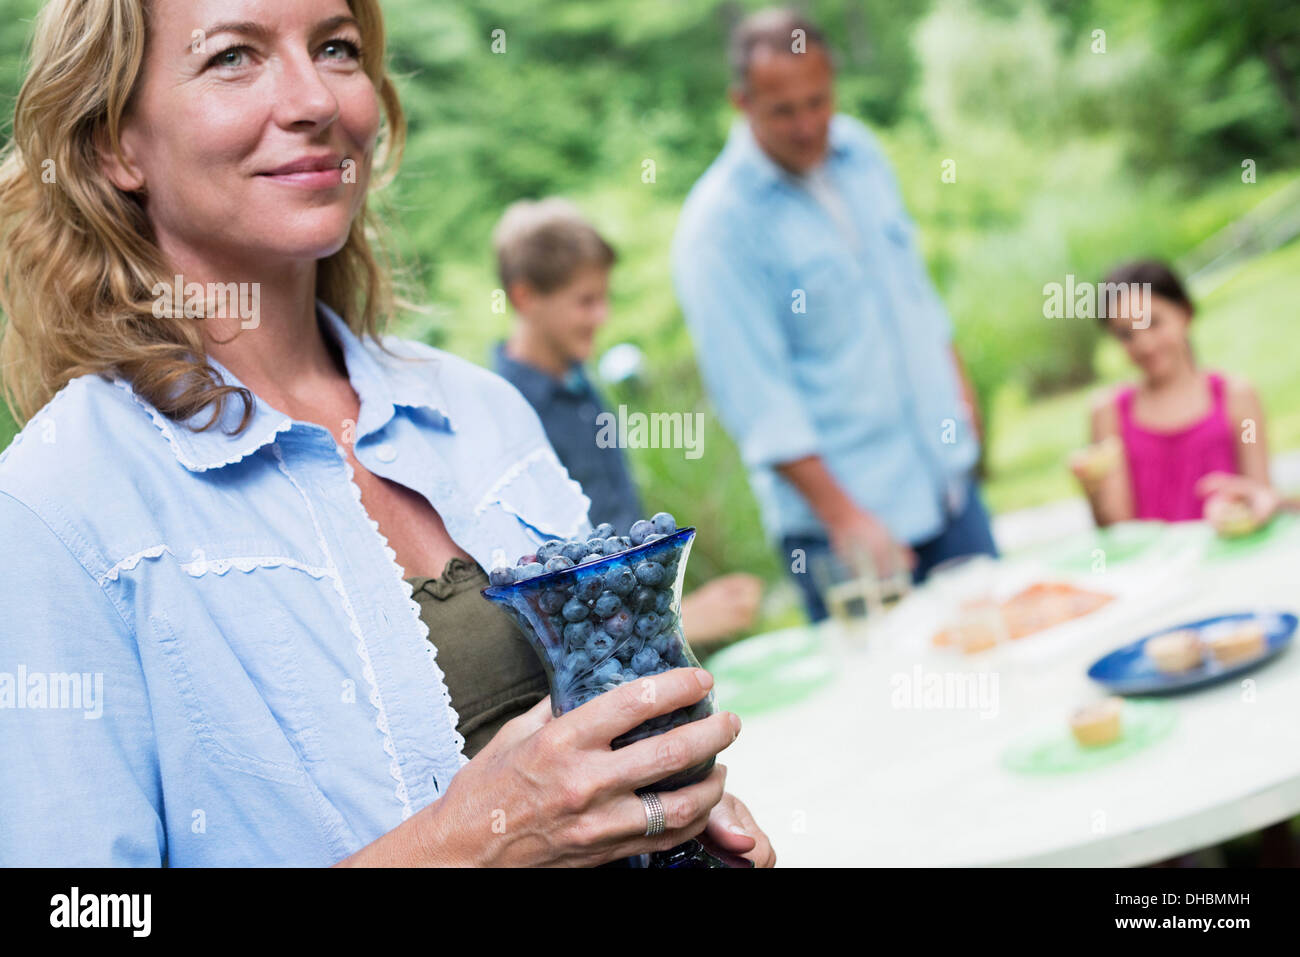 Organic Farm. An outdoor family party and picnic. Adults and children. Stock Photo